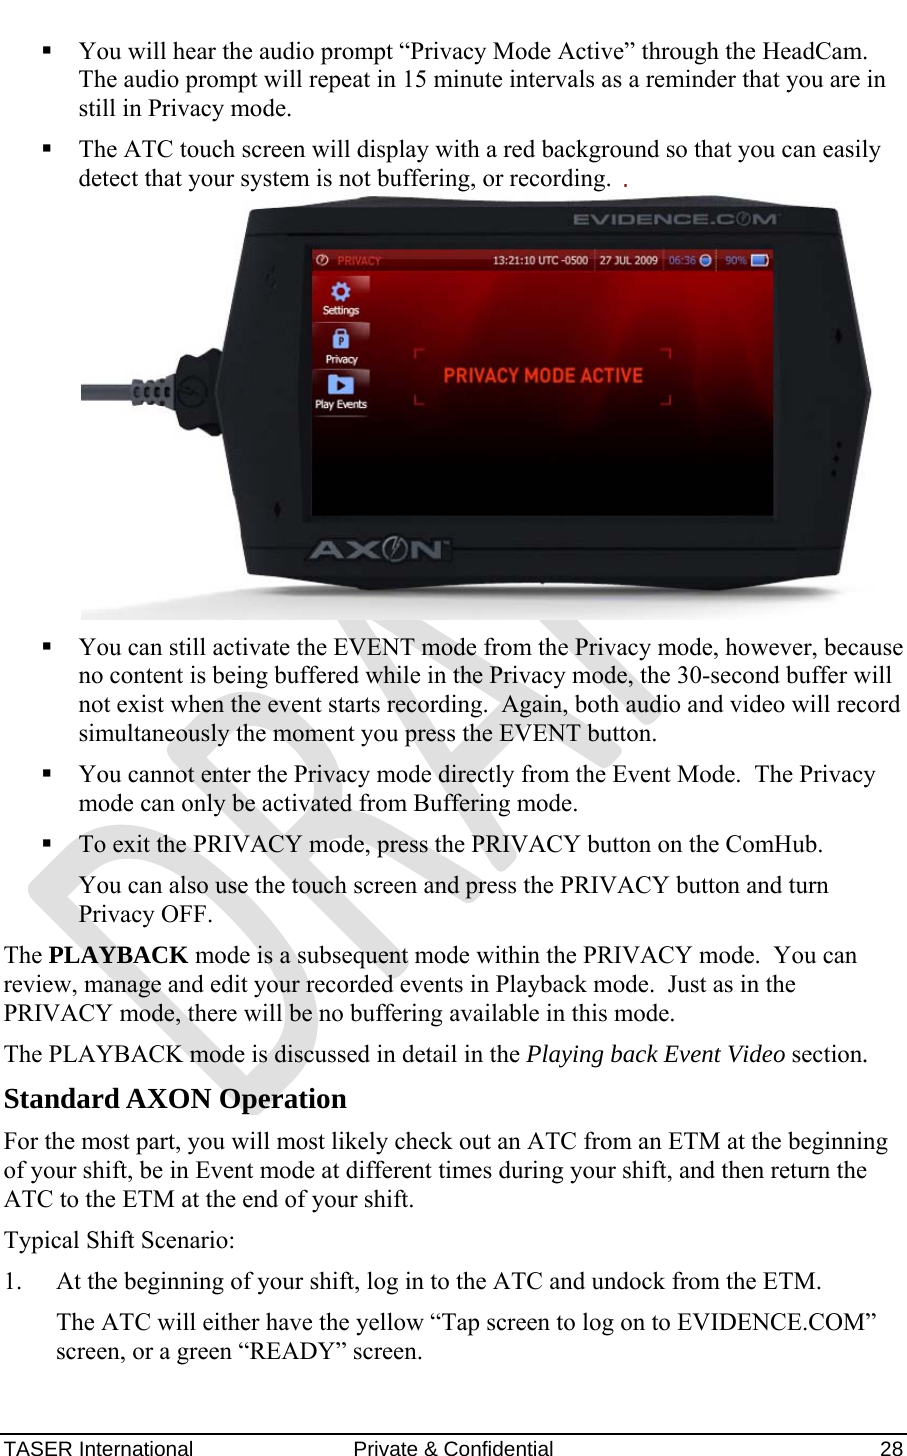 AXON™  4 Jan 2010 TASER International  Private &amp; Confidential    28  You will hear the audio prompt “Privacy Mode Active” through the HeadCam.  The audio prompt will repeat in 15 minute intervals as a reminder that you are in still in Privacy mode.  The ATC touch screen will display with a red background so that you can easily detect that your system is not buffering, or recording.    You can still activate the EVENT mode from the Privacy mode, however, because no content is being buffered while in the Privacy mode, the 30-second buffer will not exist when the event starts recording.  Again, both audio and video will record simultaneously the moment you press the EVENT button.    You cannot enter the Privacy mode directly from the Event Mode.  The Privacy mode can only be activated from Buffering mode.  To exit the PRIVACY mode, press the PRIVACY button on the ComHub. You can also use the touch screen and press the PRIVACY button and turn Privacy OFF. The PLAYBACK mode is a subsequent mode within the PRIVACY mode.  You can review, manage and edit your recorded events in Playback mode.  Just as in the PRIVACY mode, there will be no buffering available in this mode. The PLAYBACK mode is discussed in detail in the Playing back Event Video section. Standard AXON Operation For the most part, you will most likely check out an ATC from an ETM at the beginning of your shift, be in Event mode at different times during your shift, and then return the ATC to the ETM at the end of your shift. Typical Shift Scenario: 1. At the beginning of your shift, log in to the ATC and undock from the ETM. The ATC will either have the yellow “Tap screen to log on to EVIDENCE.COM” screen, or a green “READY” screen.  